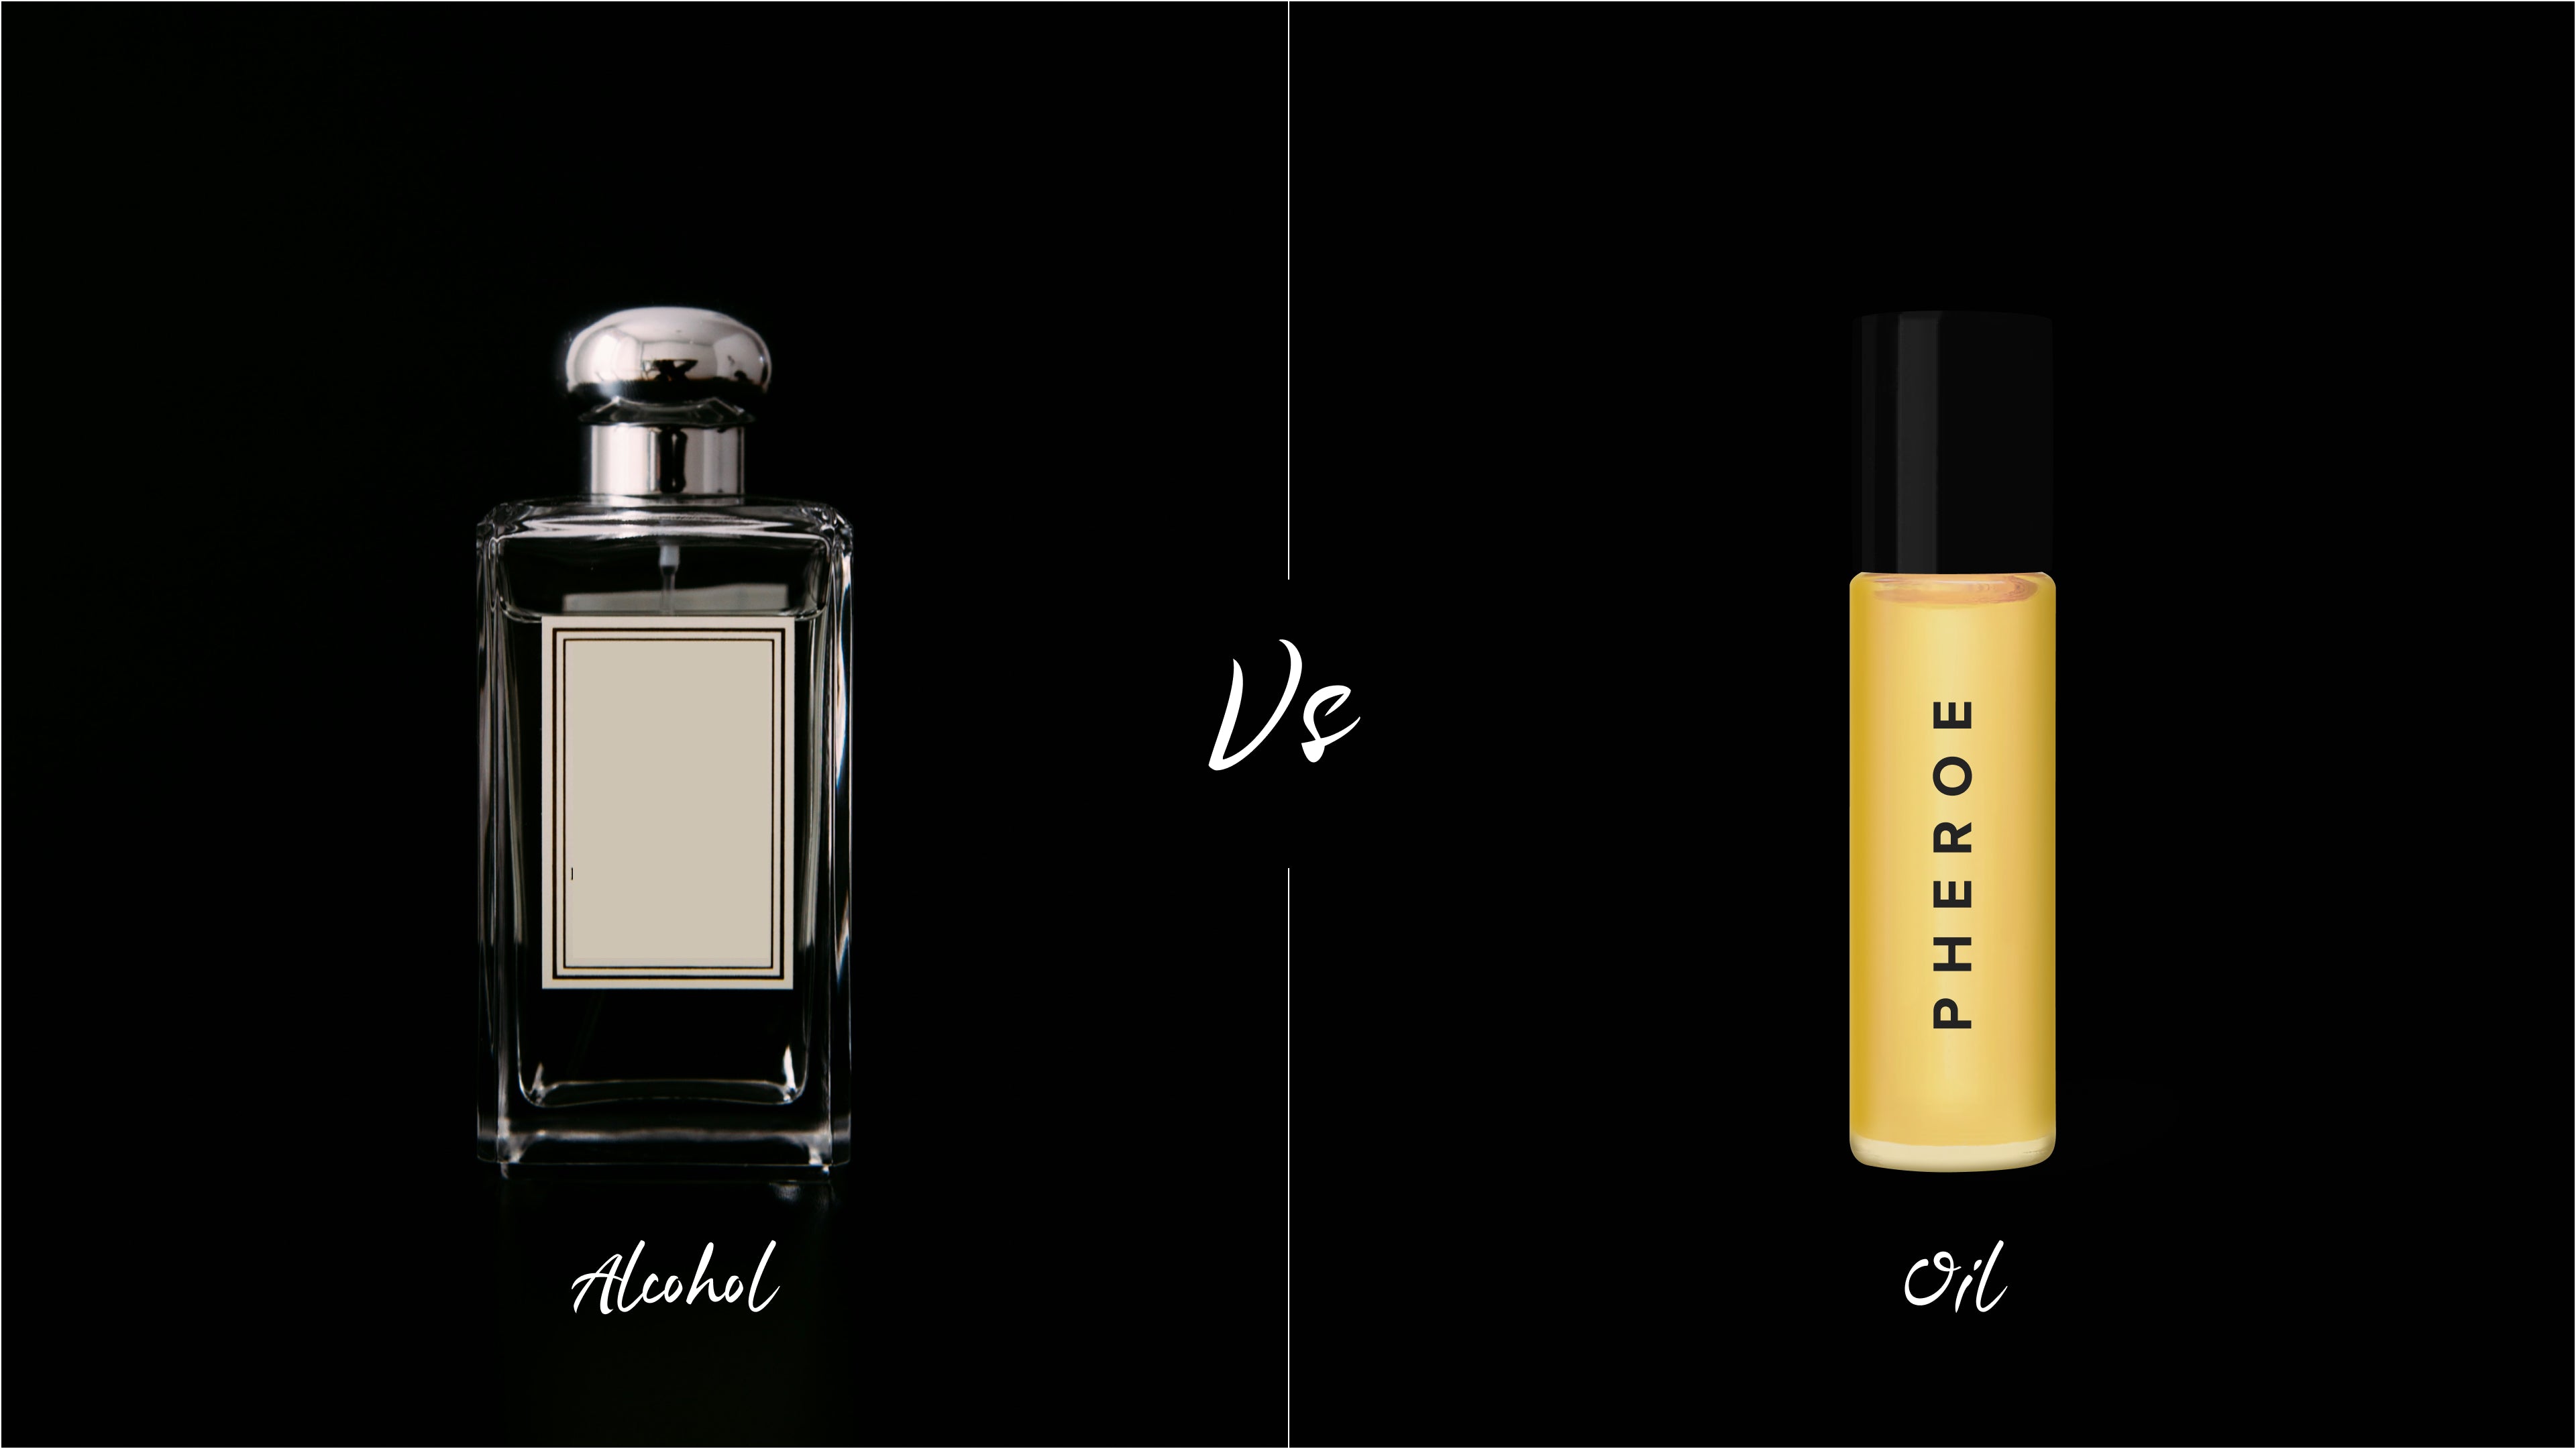 Alcohol vs Oil-Based Colognes: A Fragrance Face-Off